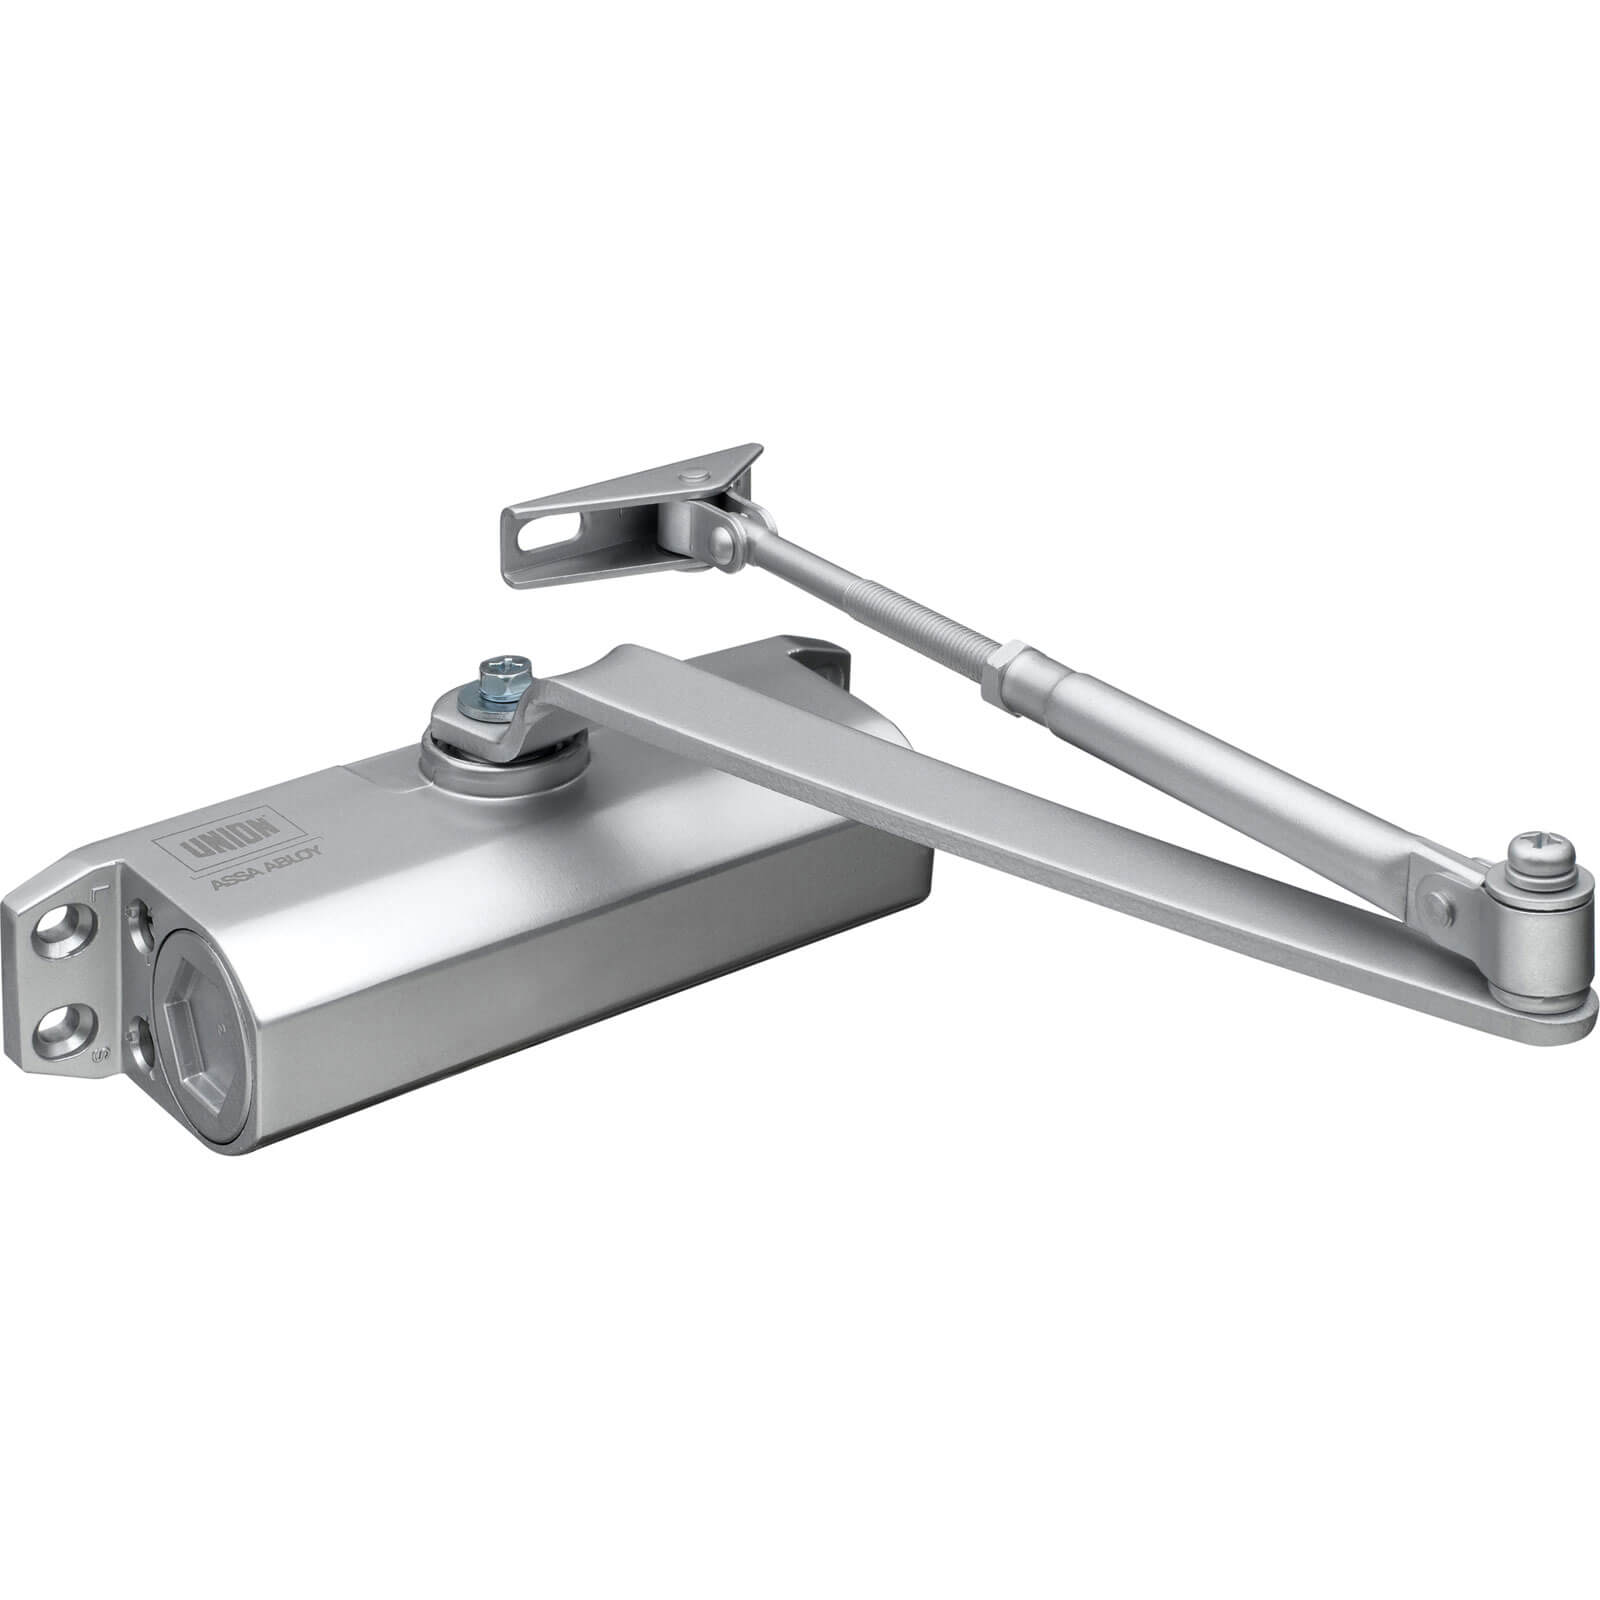 Image of Union CE3F Size 3 Rack and Pinion Door Closer 60kg